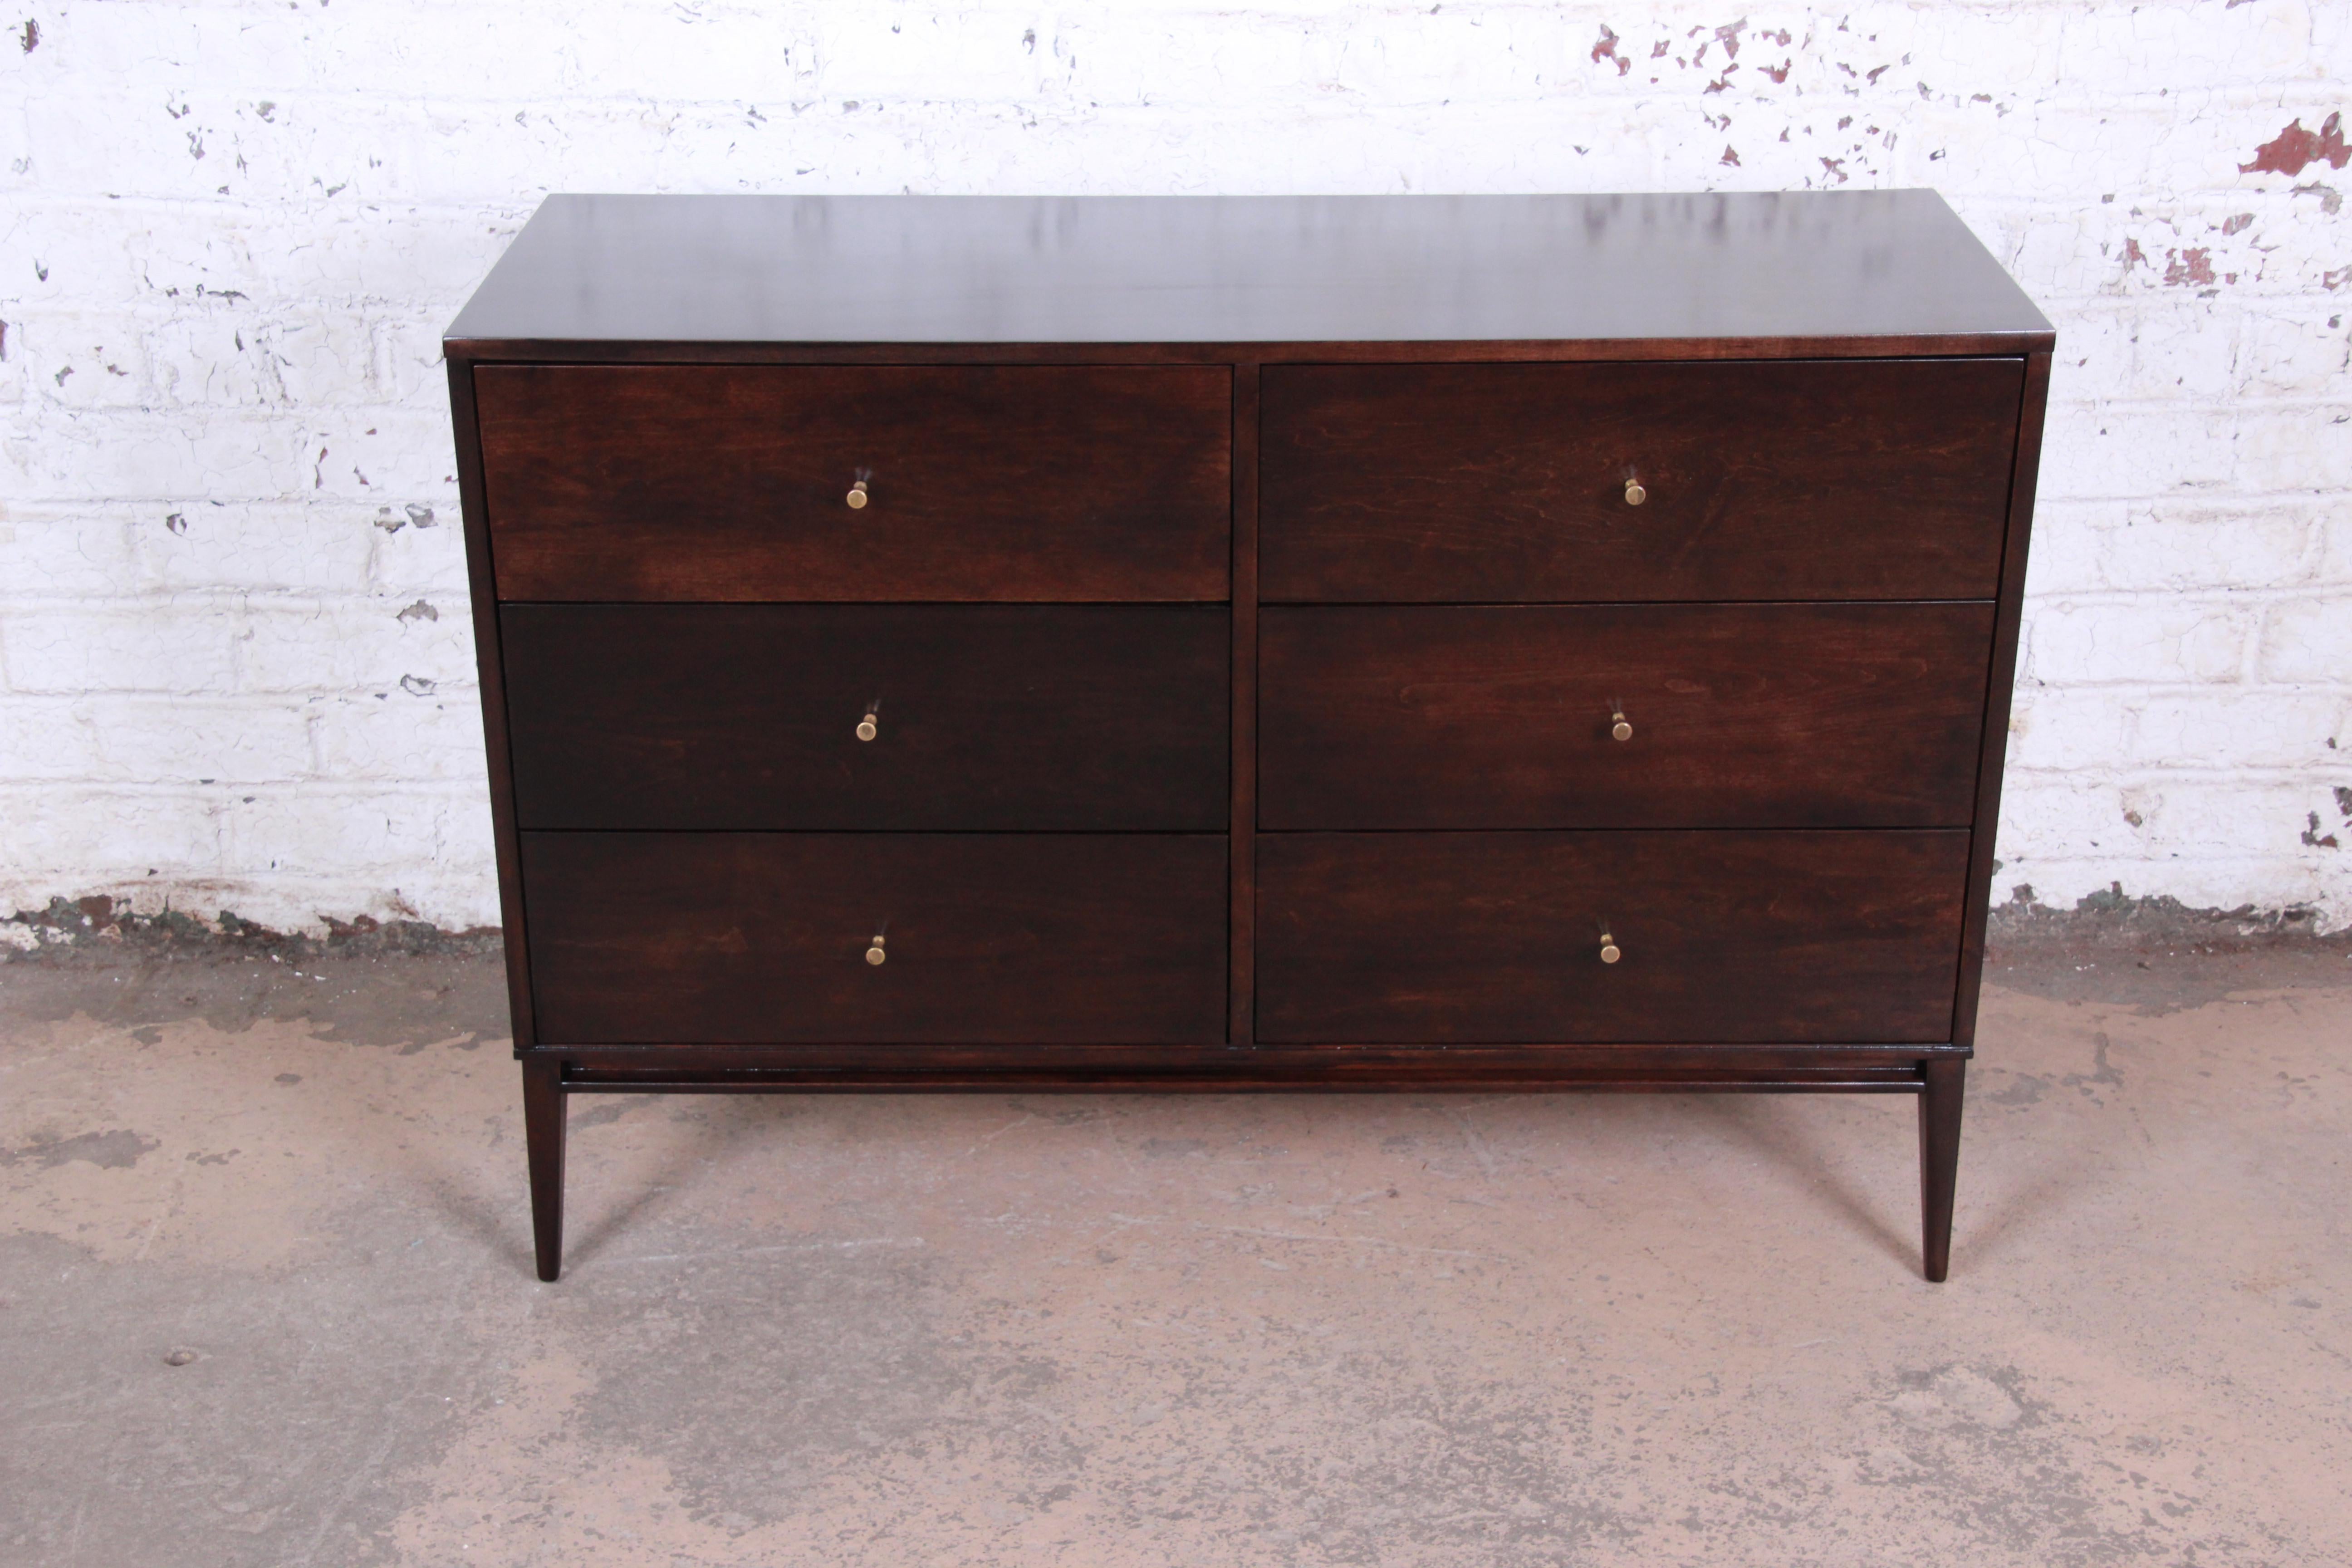 A stunning Mid-Century Modern six-drawer dresser designed by Paul McCobb for his Planner Group line for Winchendon Furniture. The dresser features solid birch wood construction and McCobb's iconic Minimalist midcentury design. It offers ample room